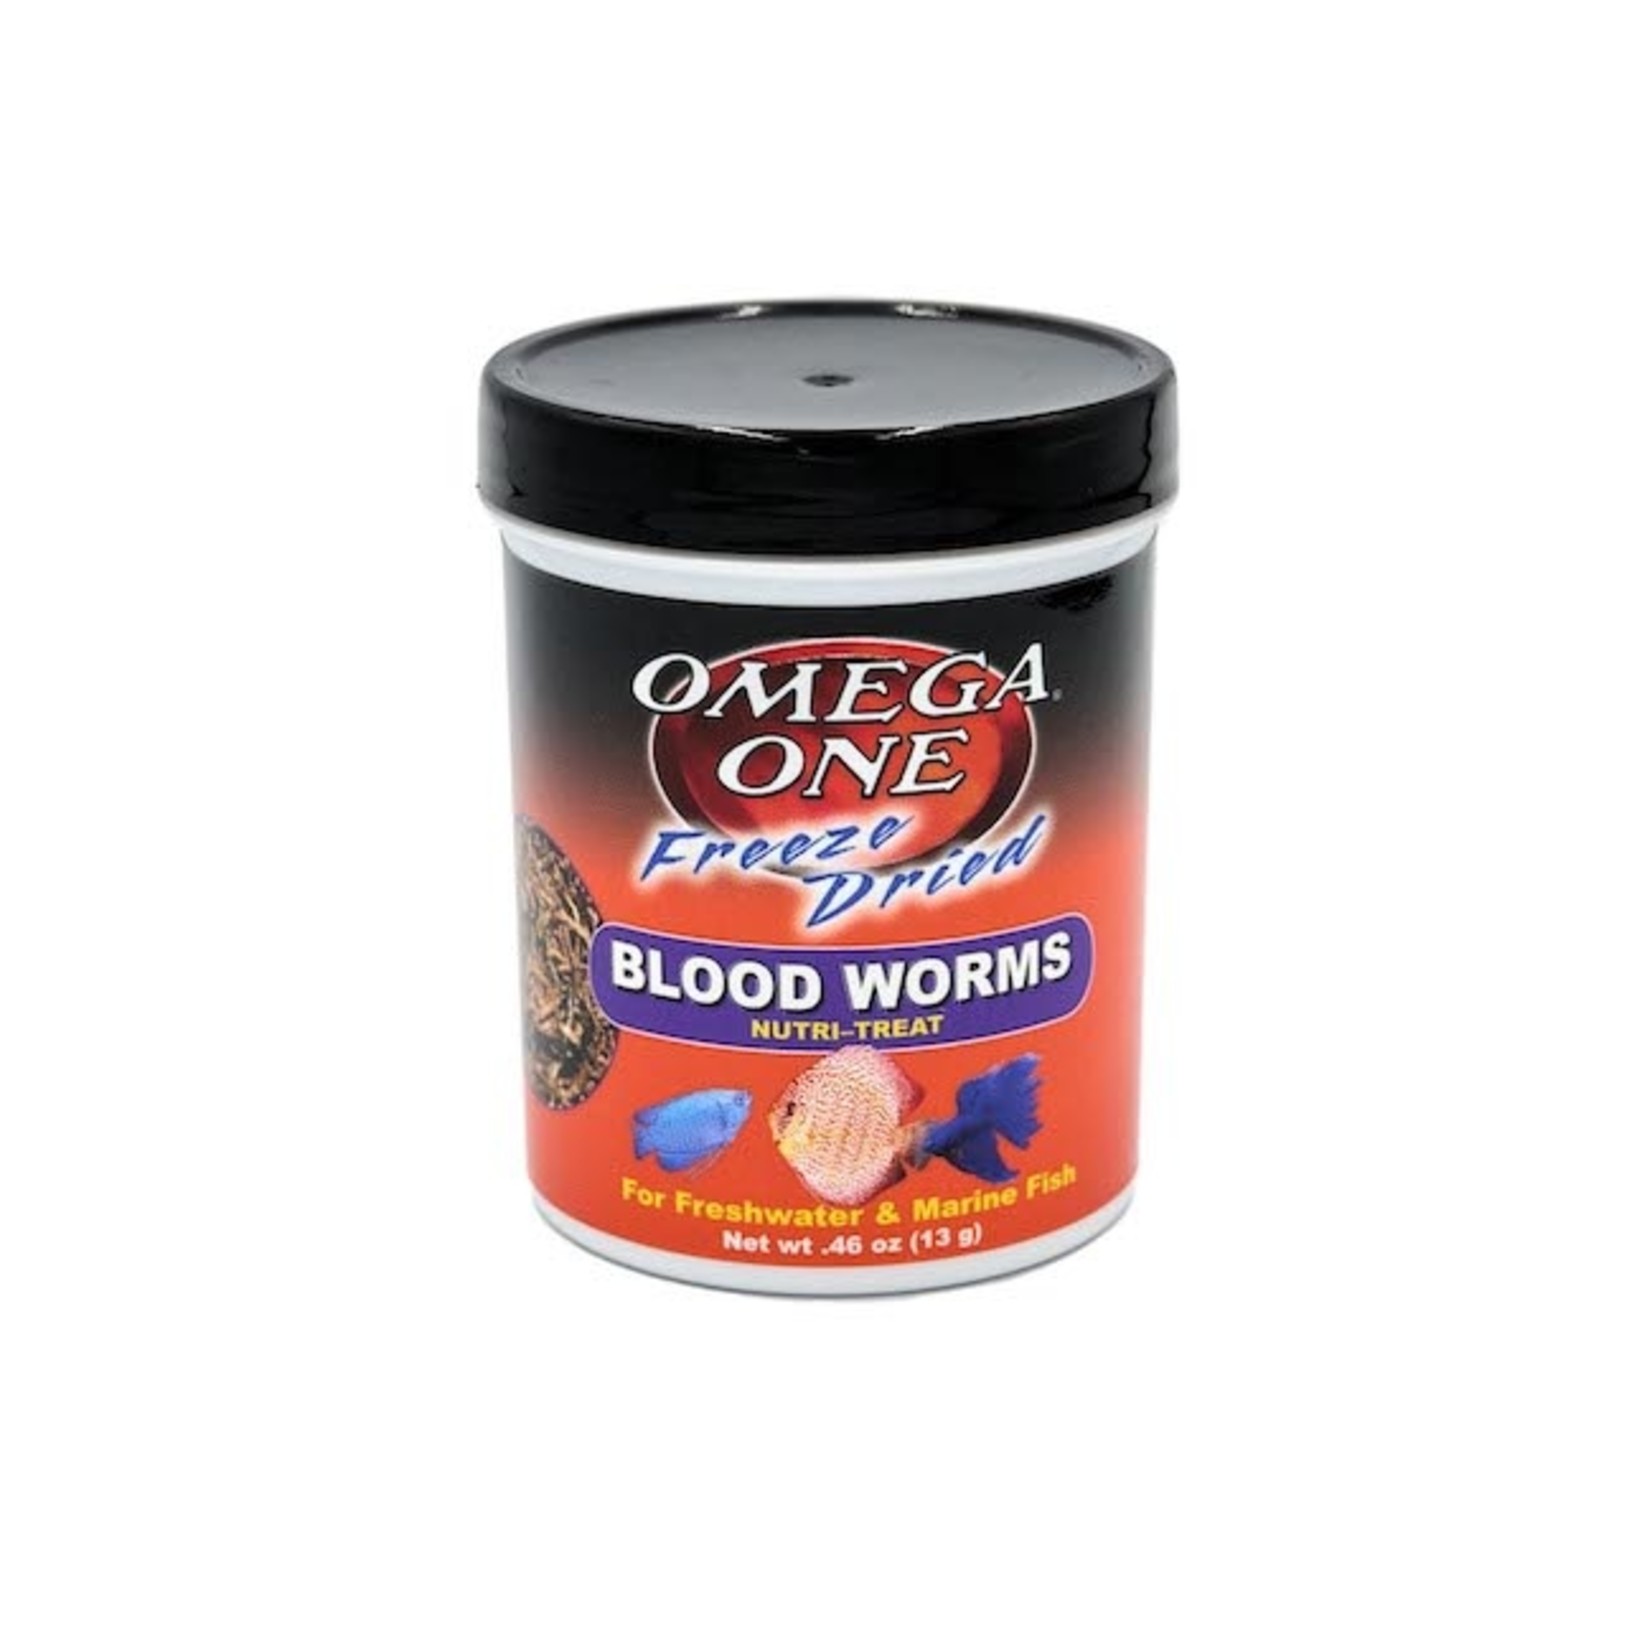 Omega One Freeze-Dried Blood Worms